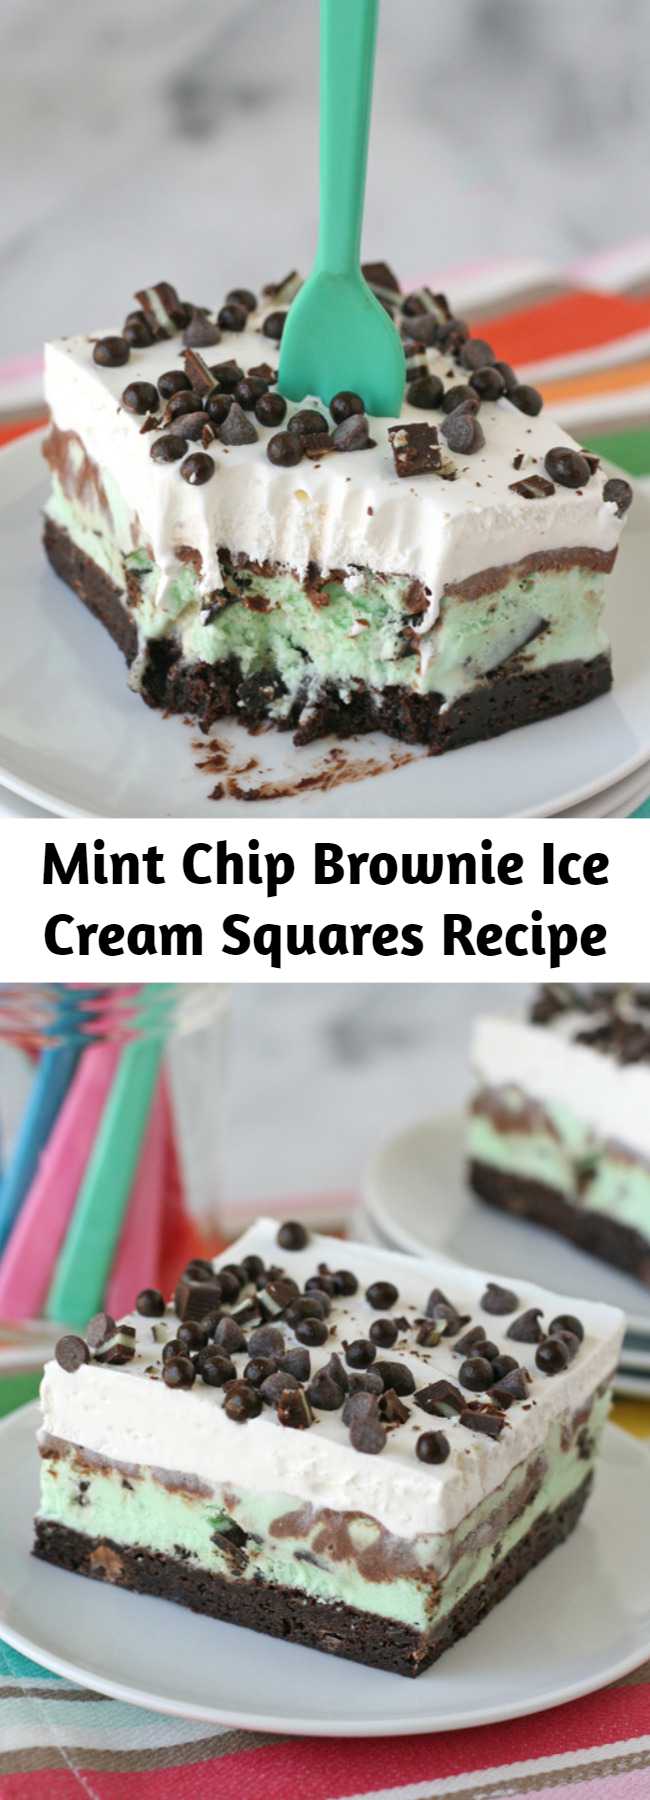 Mint Chip Brownie Ice Cream Squares Recipe - Mint chip ice cream is layered on fudge brownies, then topped with a layer of chocolate, whipped cream and mini chocolate chips... this is the PERFECT summer dessert!